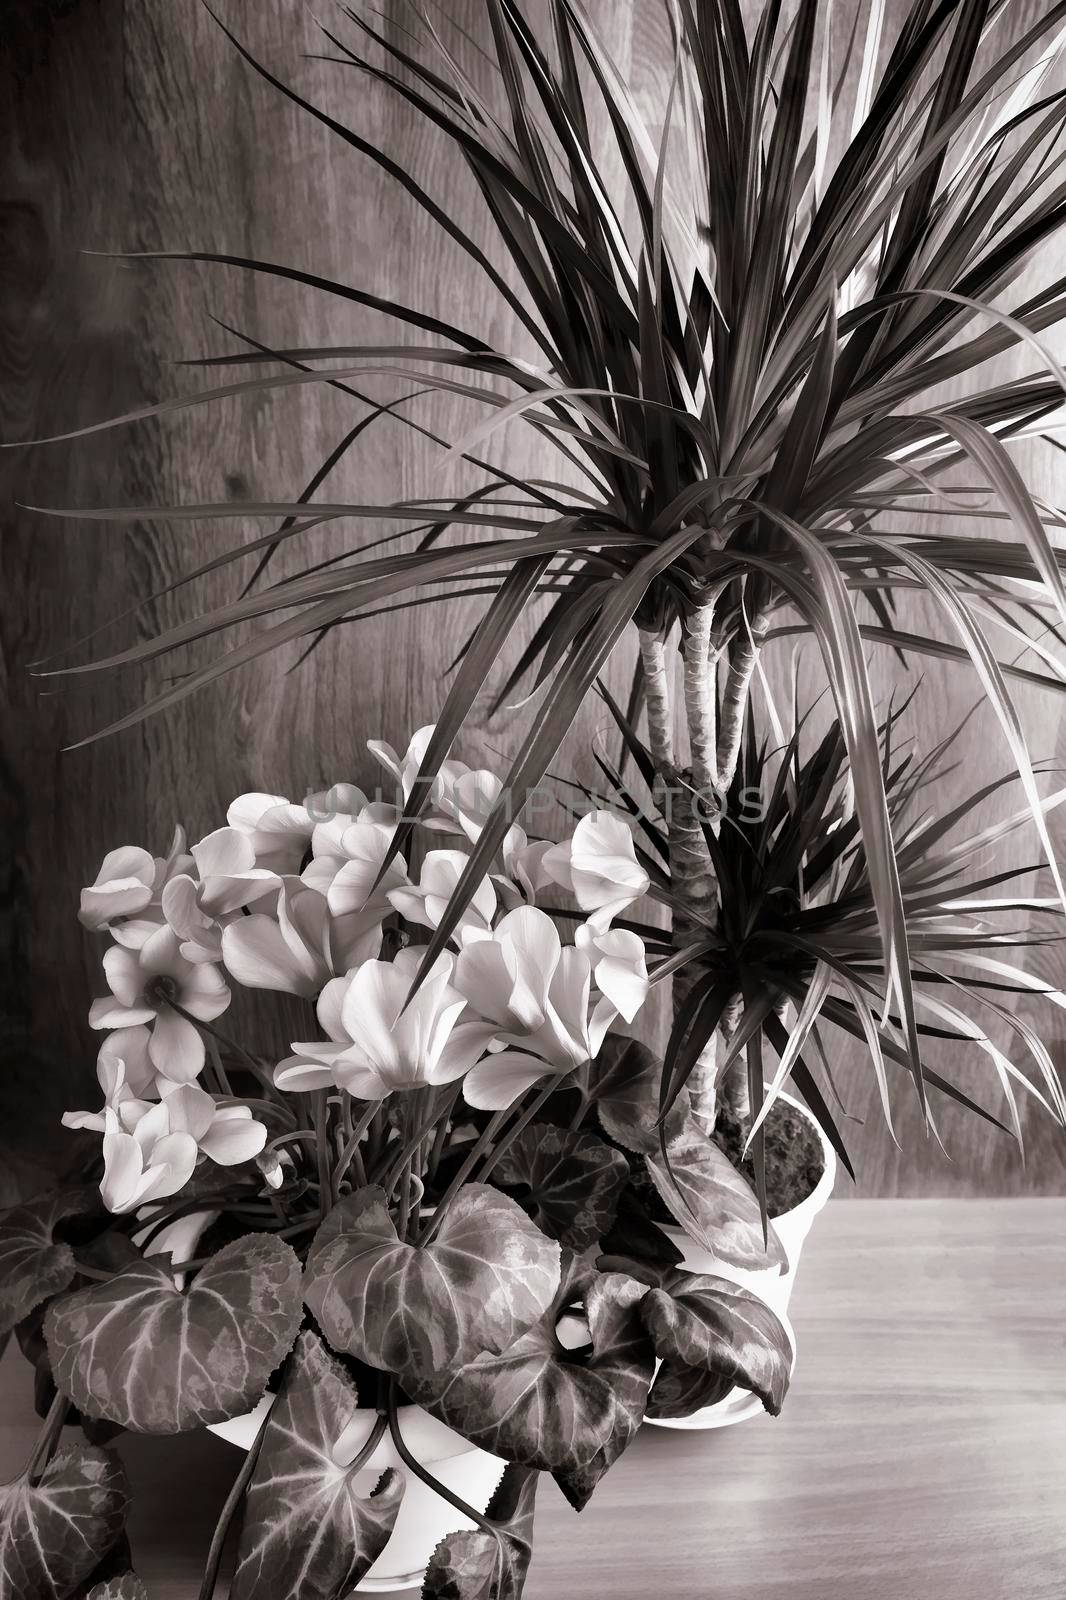 Potted flowers: blooming pink cyclamen and tropical plant dracaena. Black and white image.